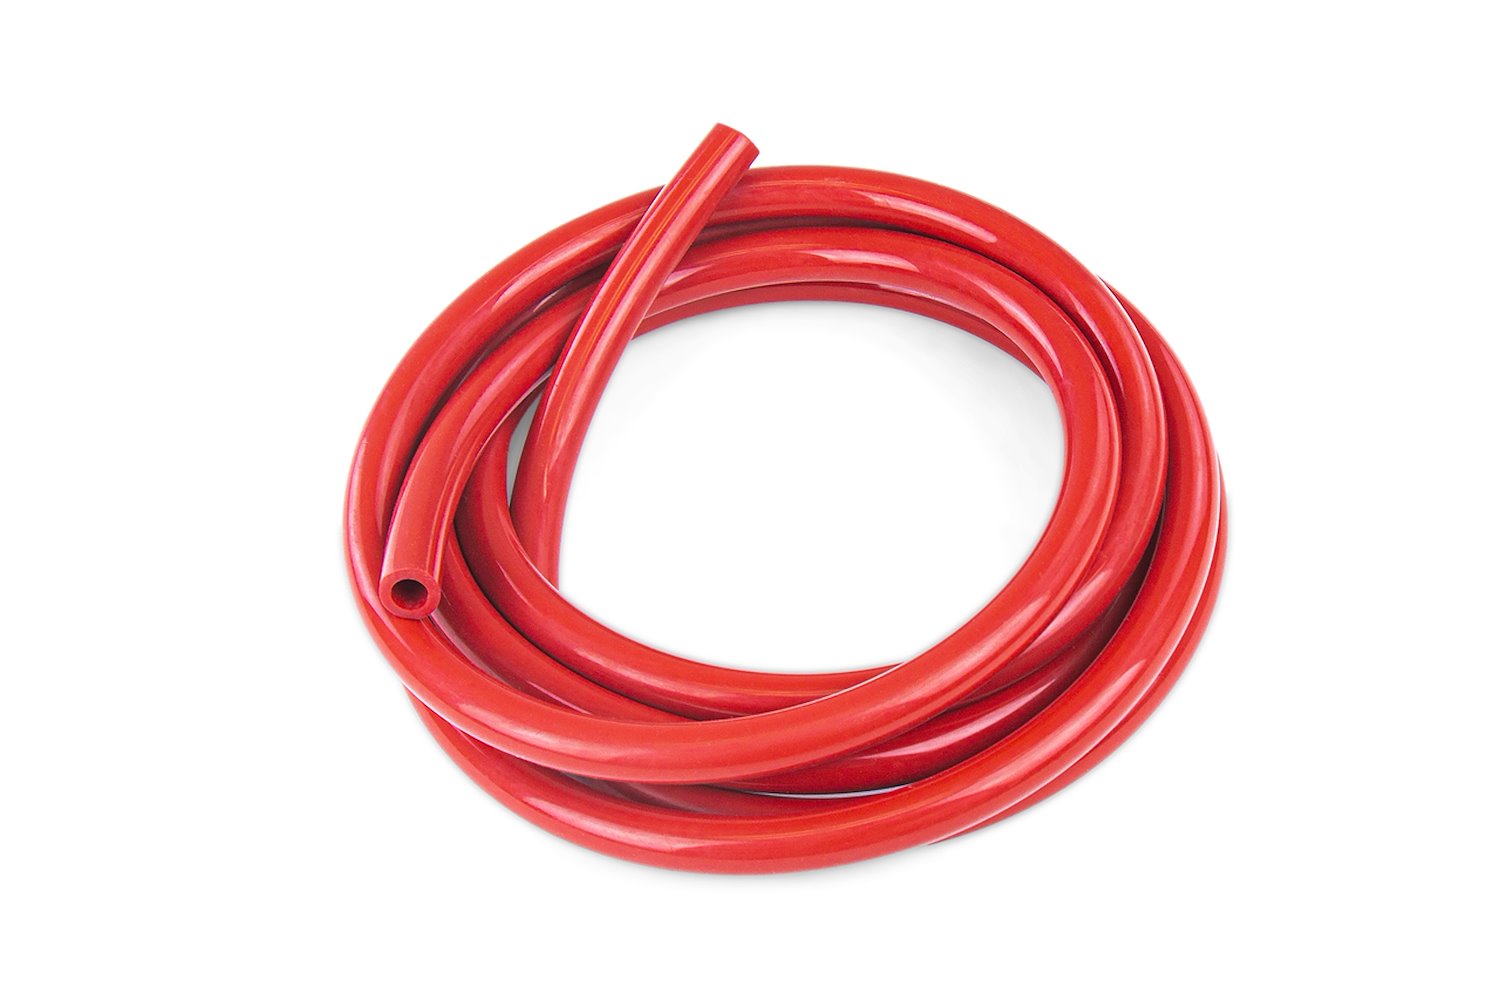 HTSVH5-REDx5 High-Temperature Silicone Vacuum Hose Tubing, 13/64 in. ID, 5 ft. Roll, Red